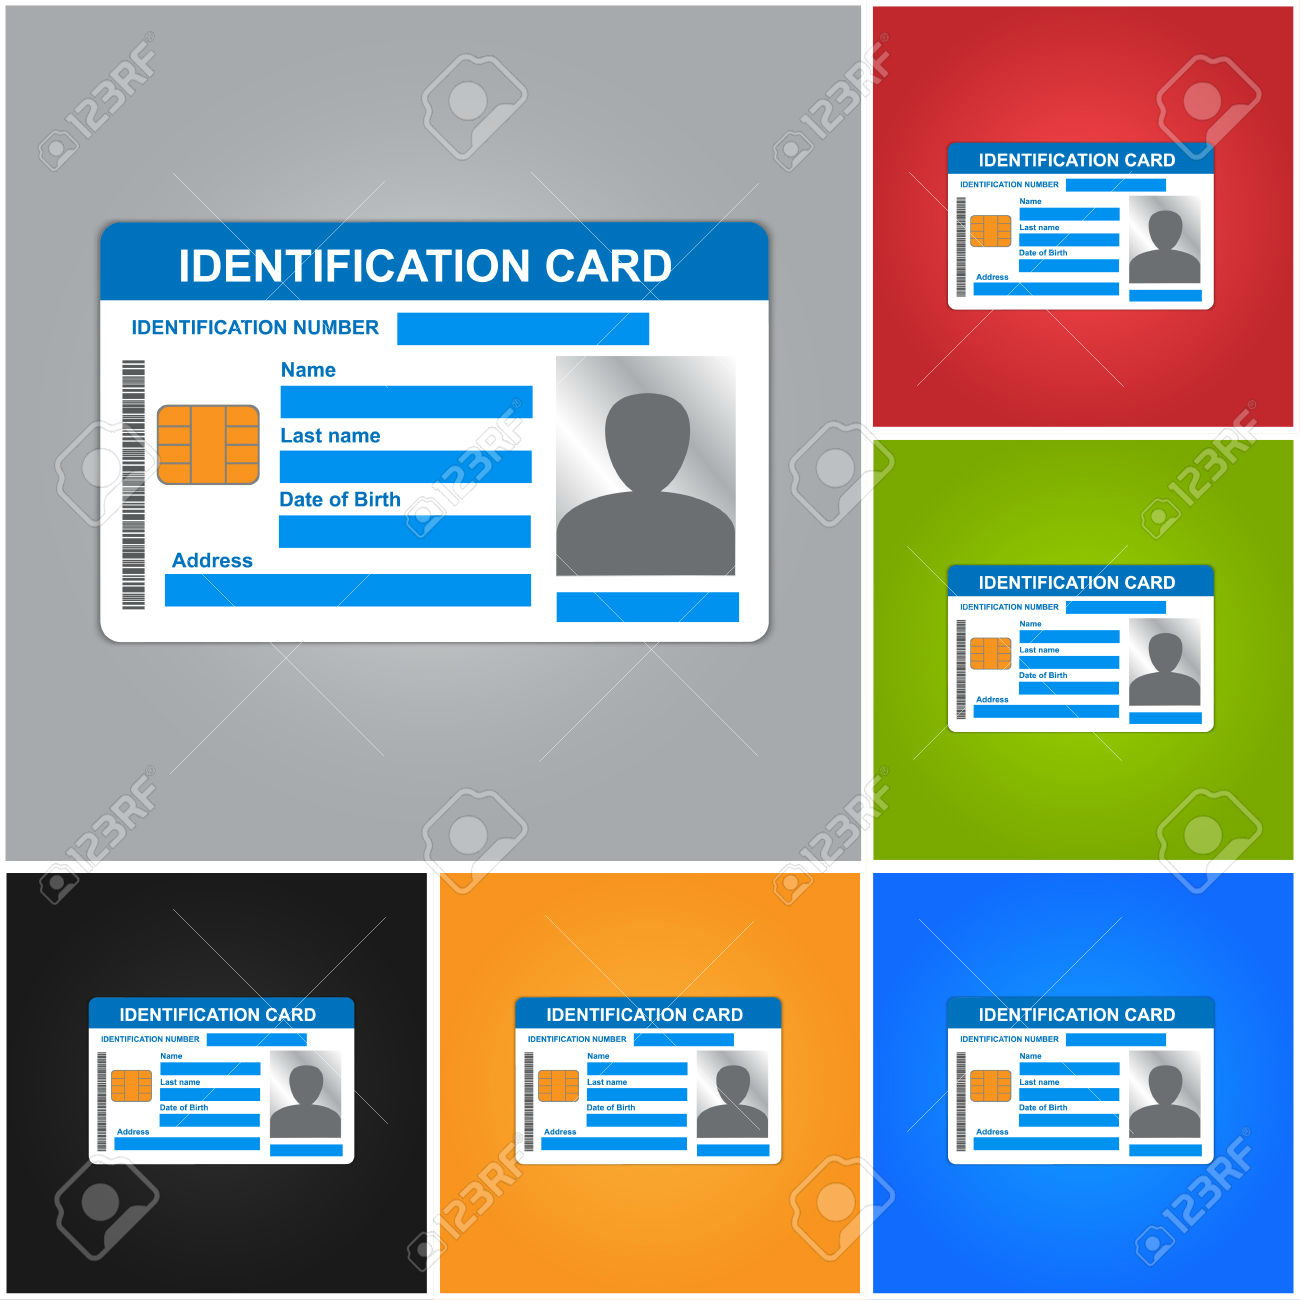 11+ Iconic Student Card Templates – Ai, Psd, Word | Free Intended For Isic Card Template